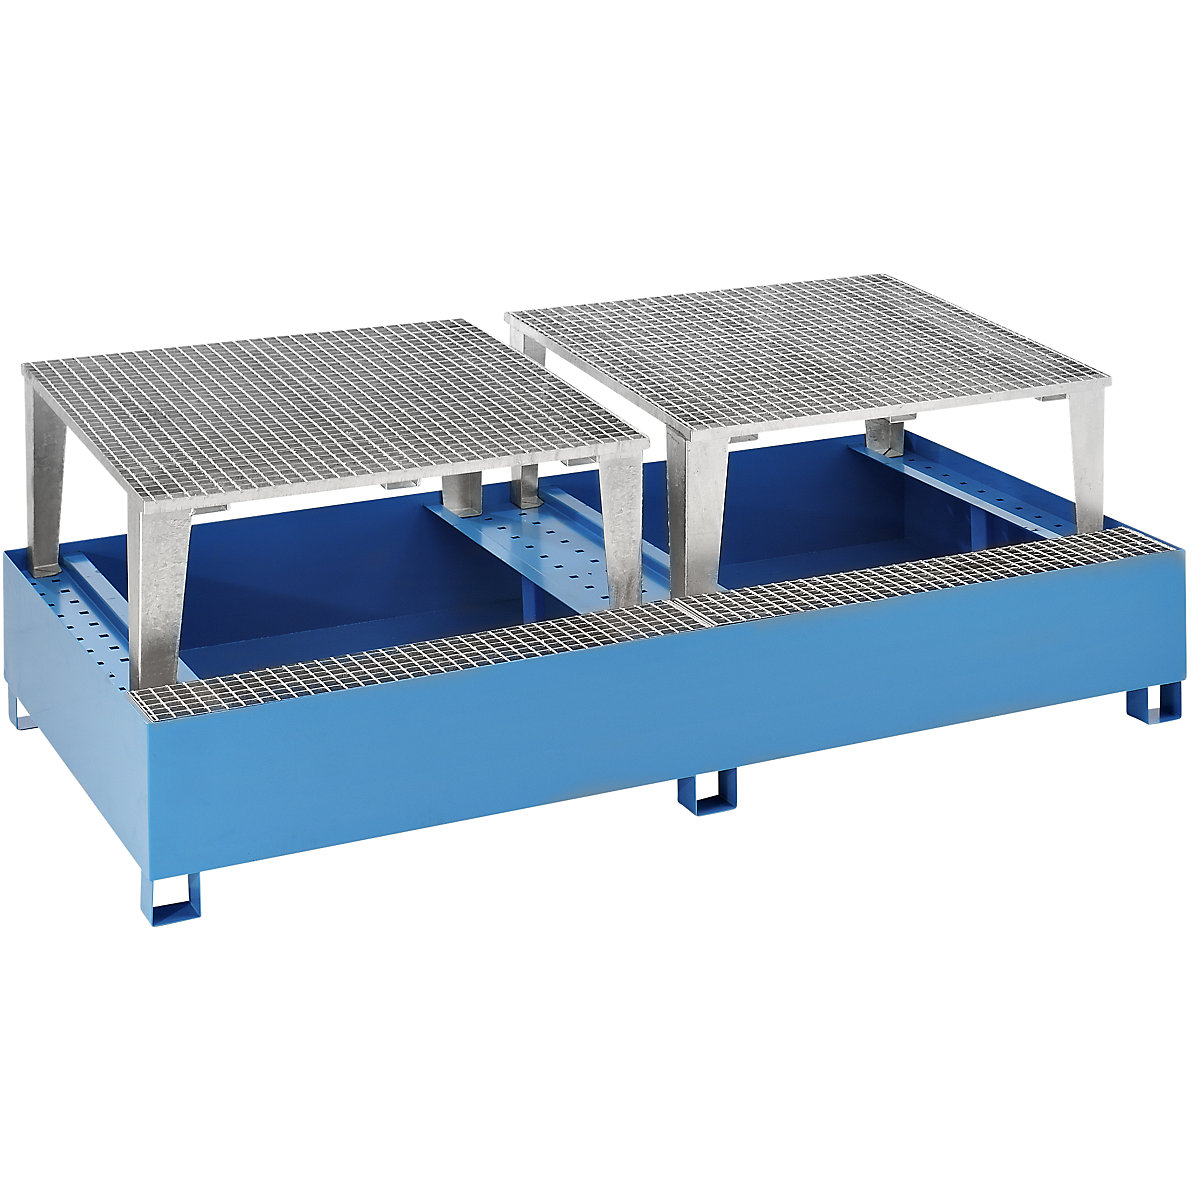 Steel sump tray for IBC/CTC tank containers – eurokraft basic, for 2 x 1000 l containers, 2 filling attachments, powder coated, blue RAL 5012-2